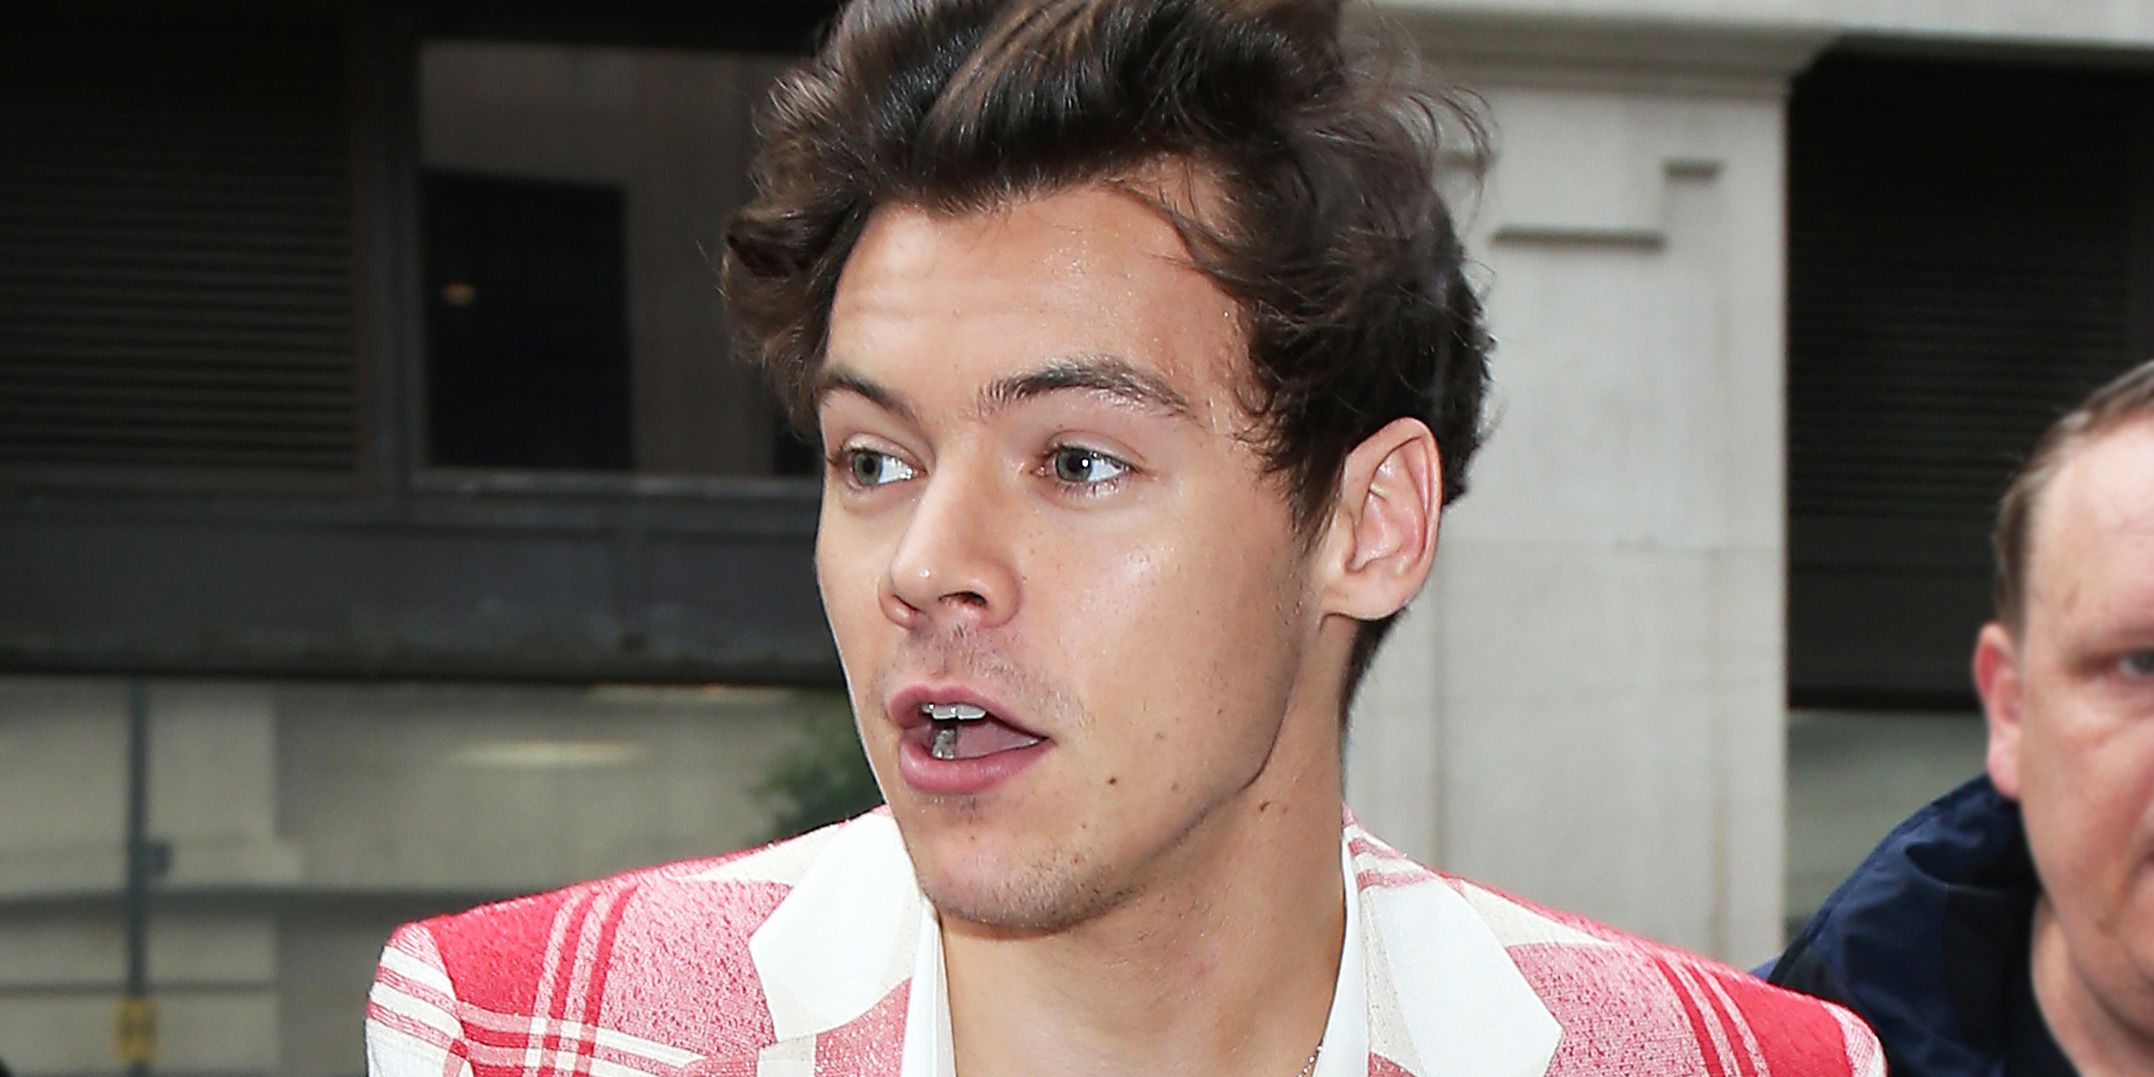 Harry Styles Looks Great In Heels and Red Plaid Suit